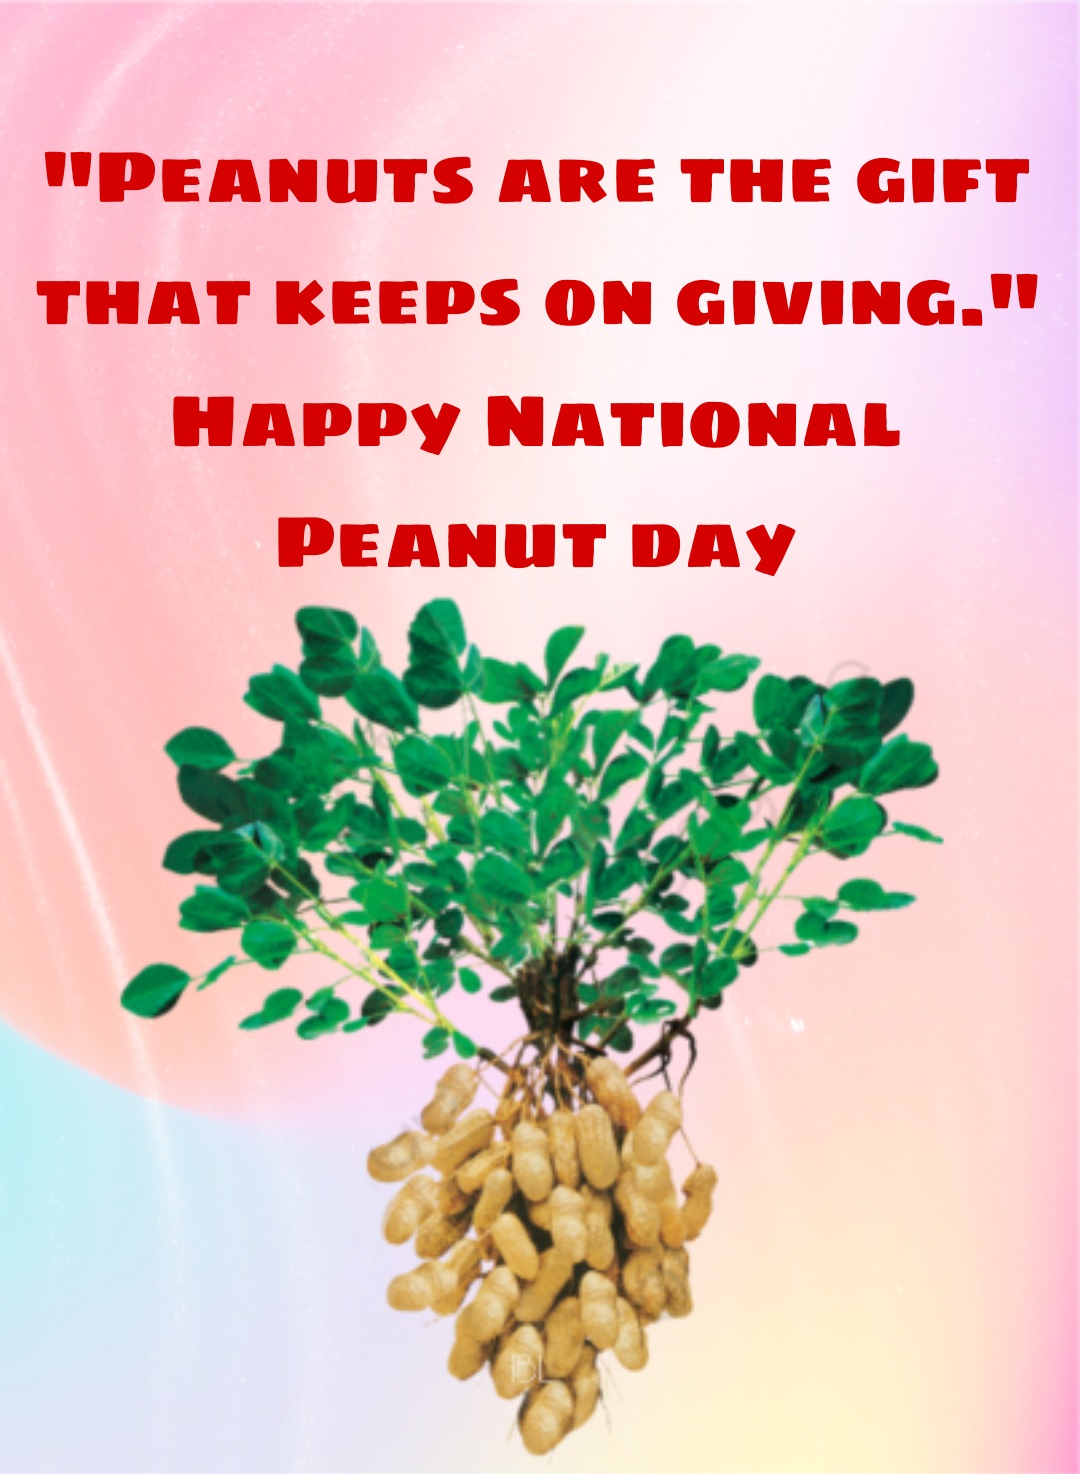 National Peanut Day Quotes, Greetings, Messages, Images